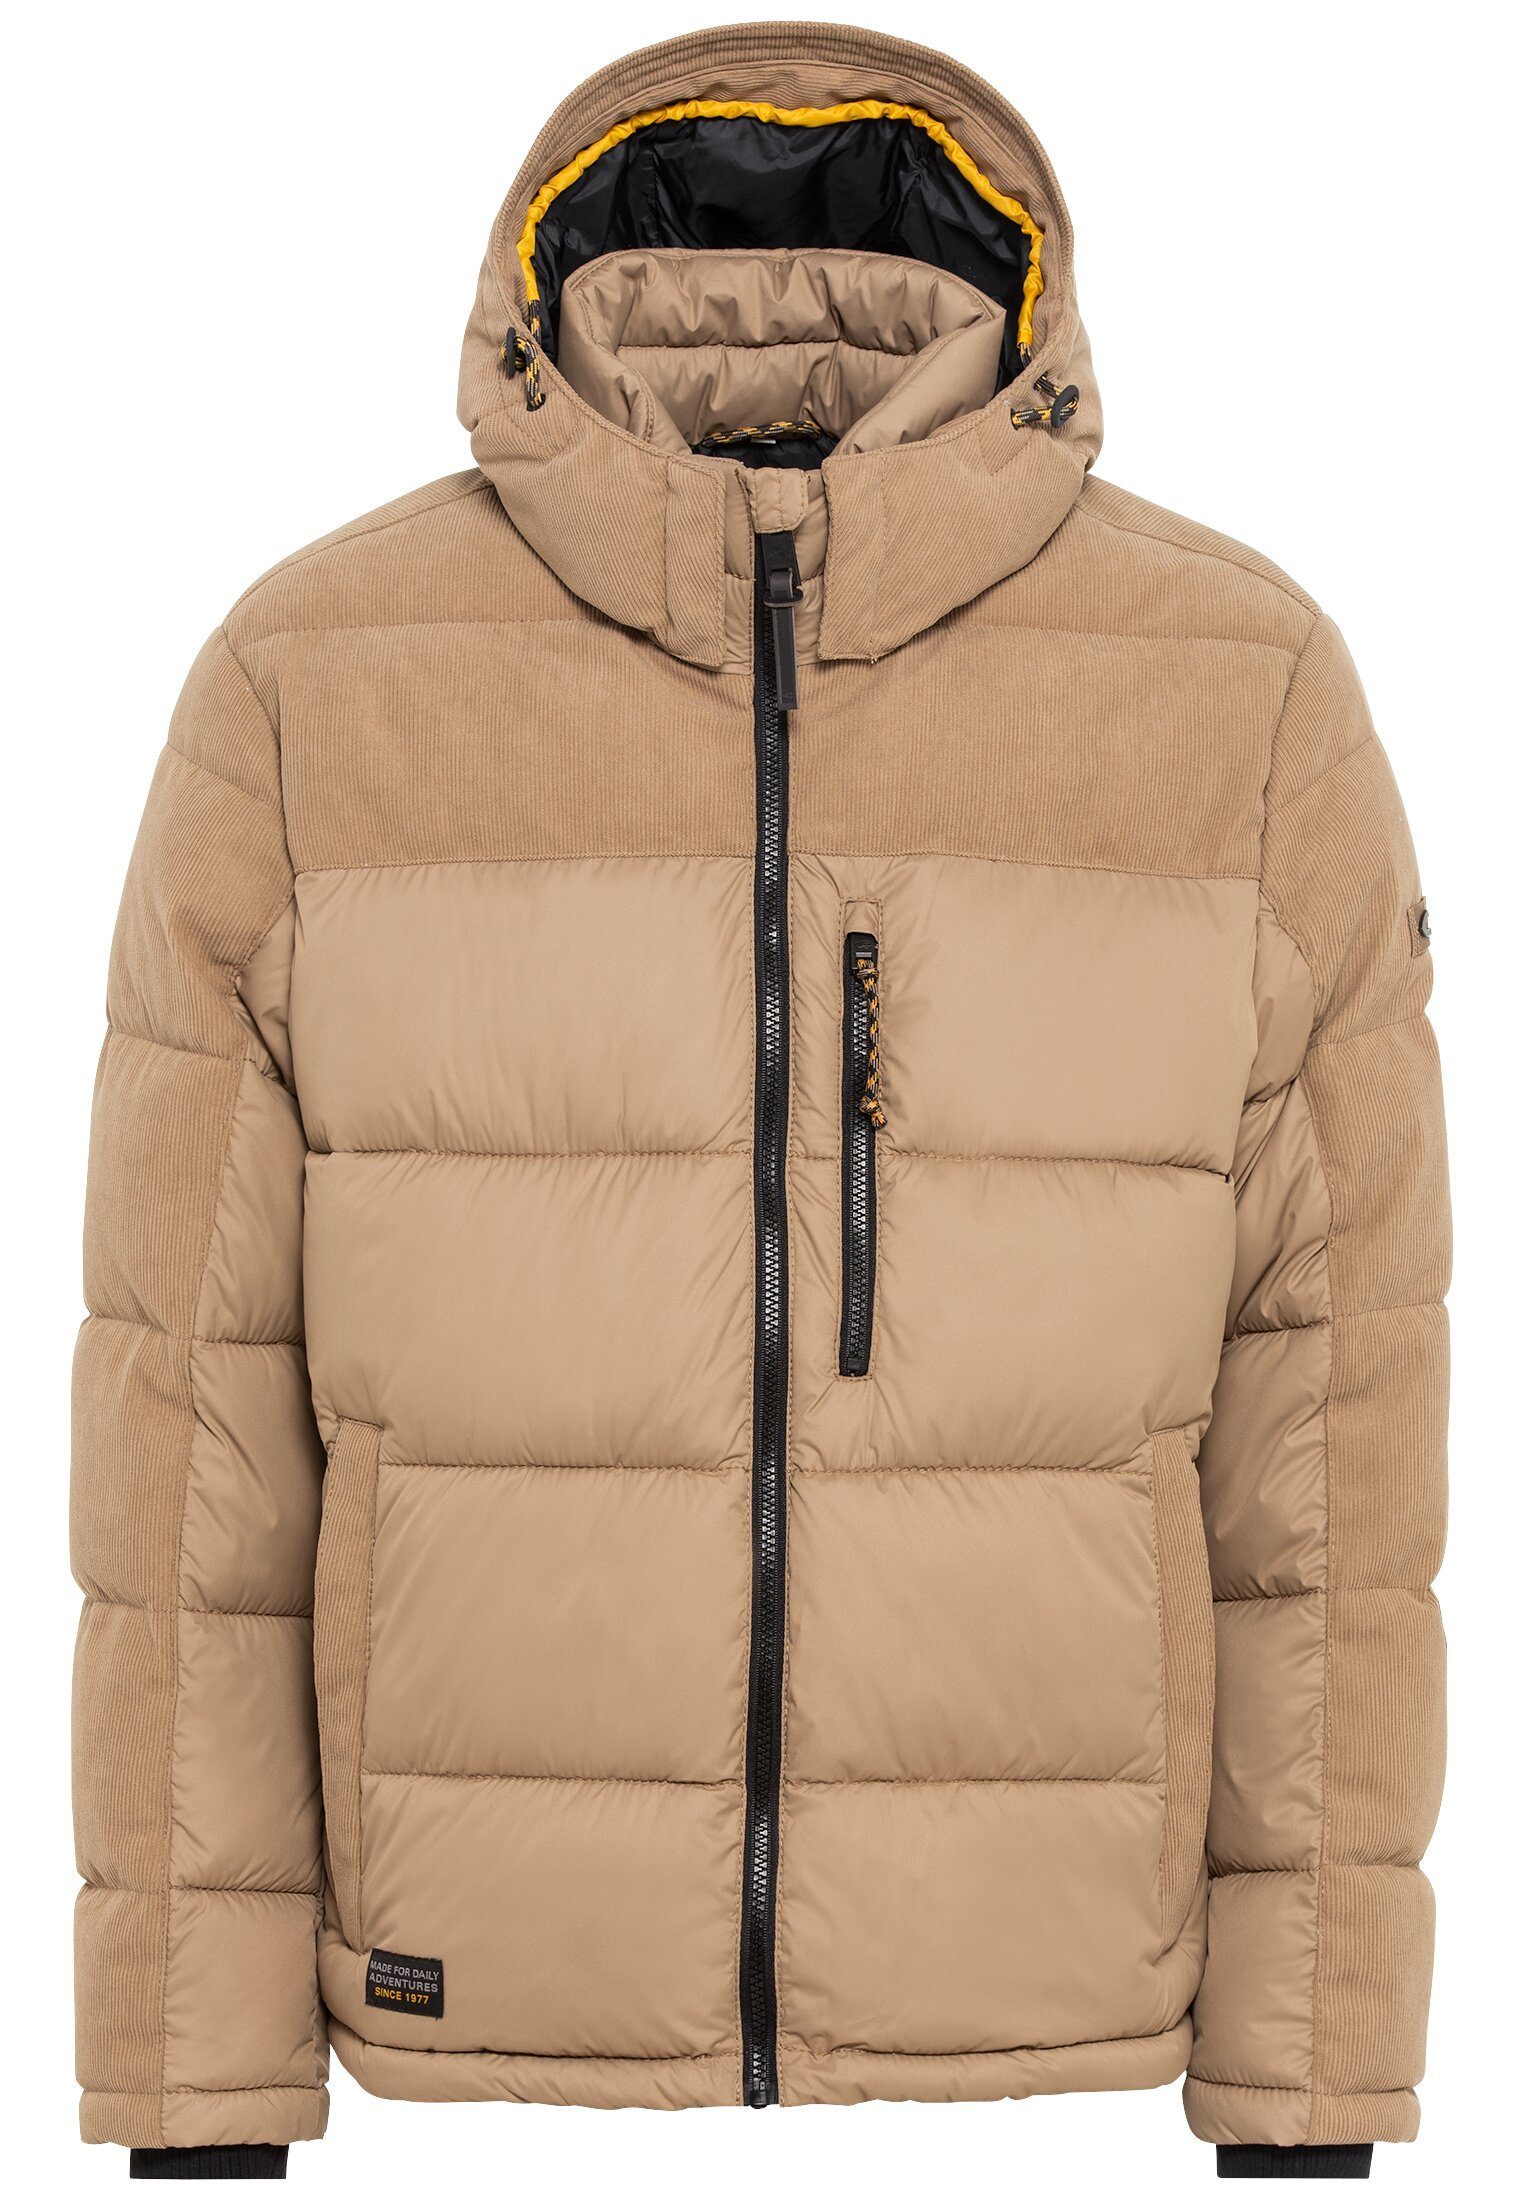 camel active Wolljacke, Oberstoff: 100% Polyester, Futter: 100% Polyester,  Wattierung: 100% Polyester